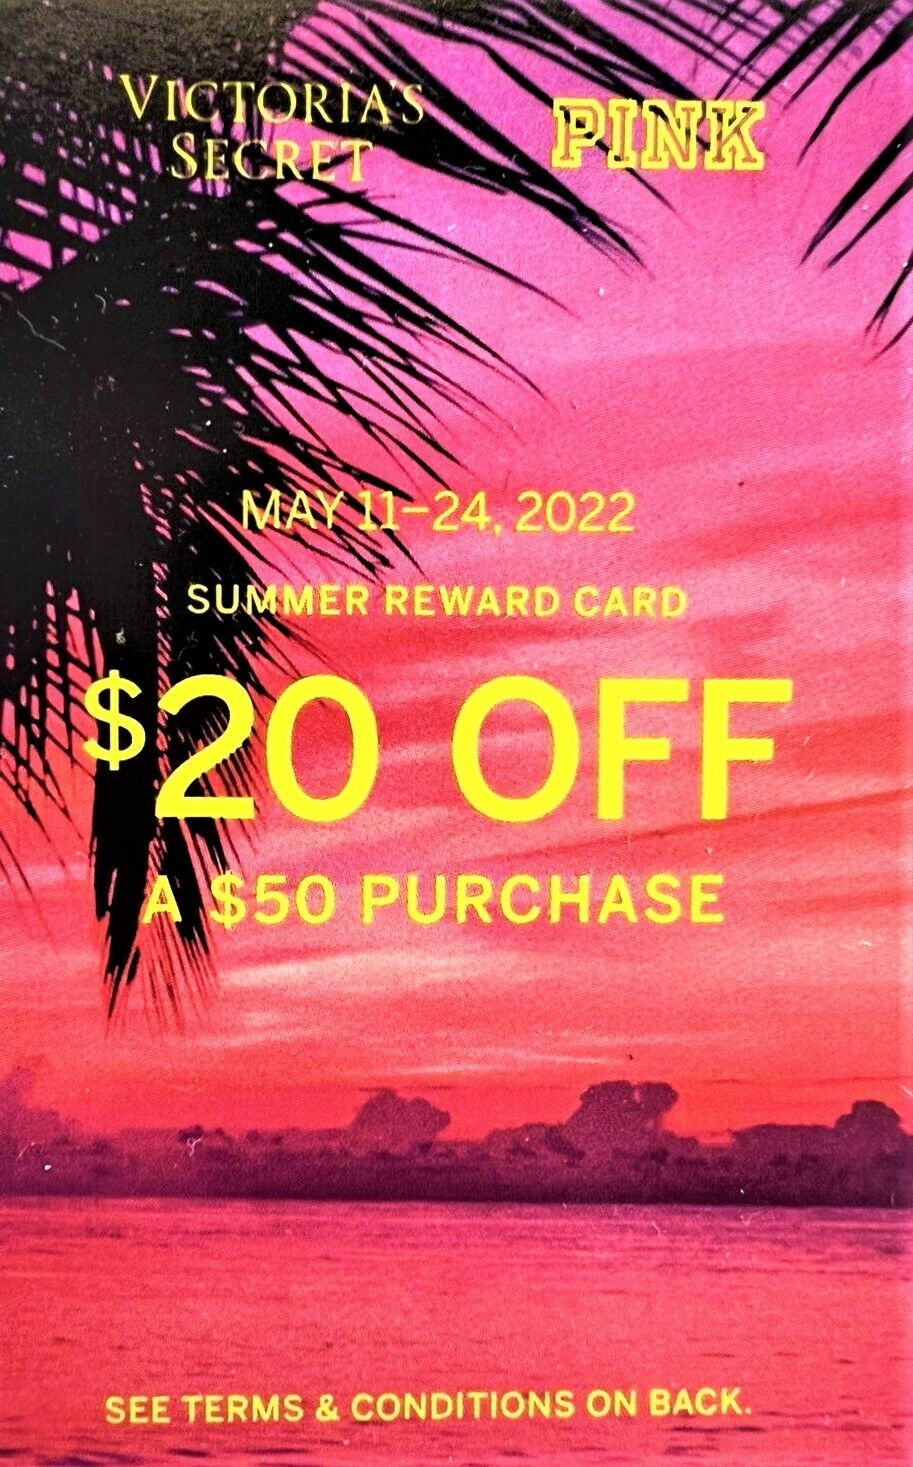 VICTORIA'S SECRET Coupon $20 OFF $50 Purchase ~ May 11-24 2022